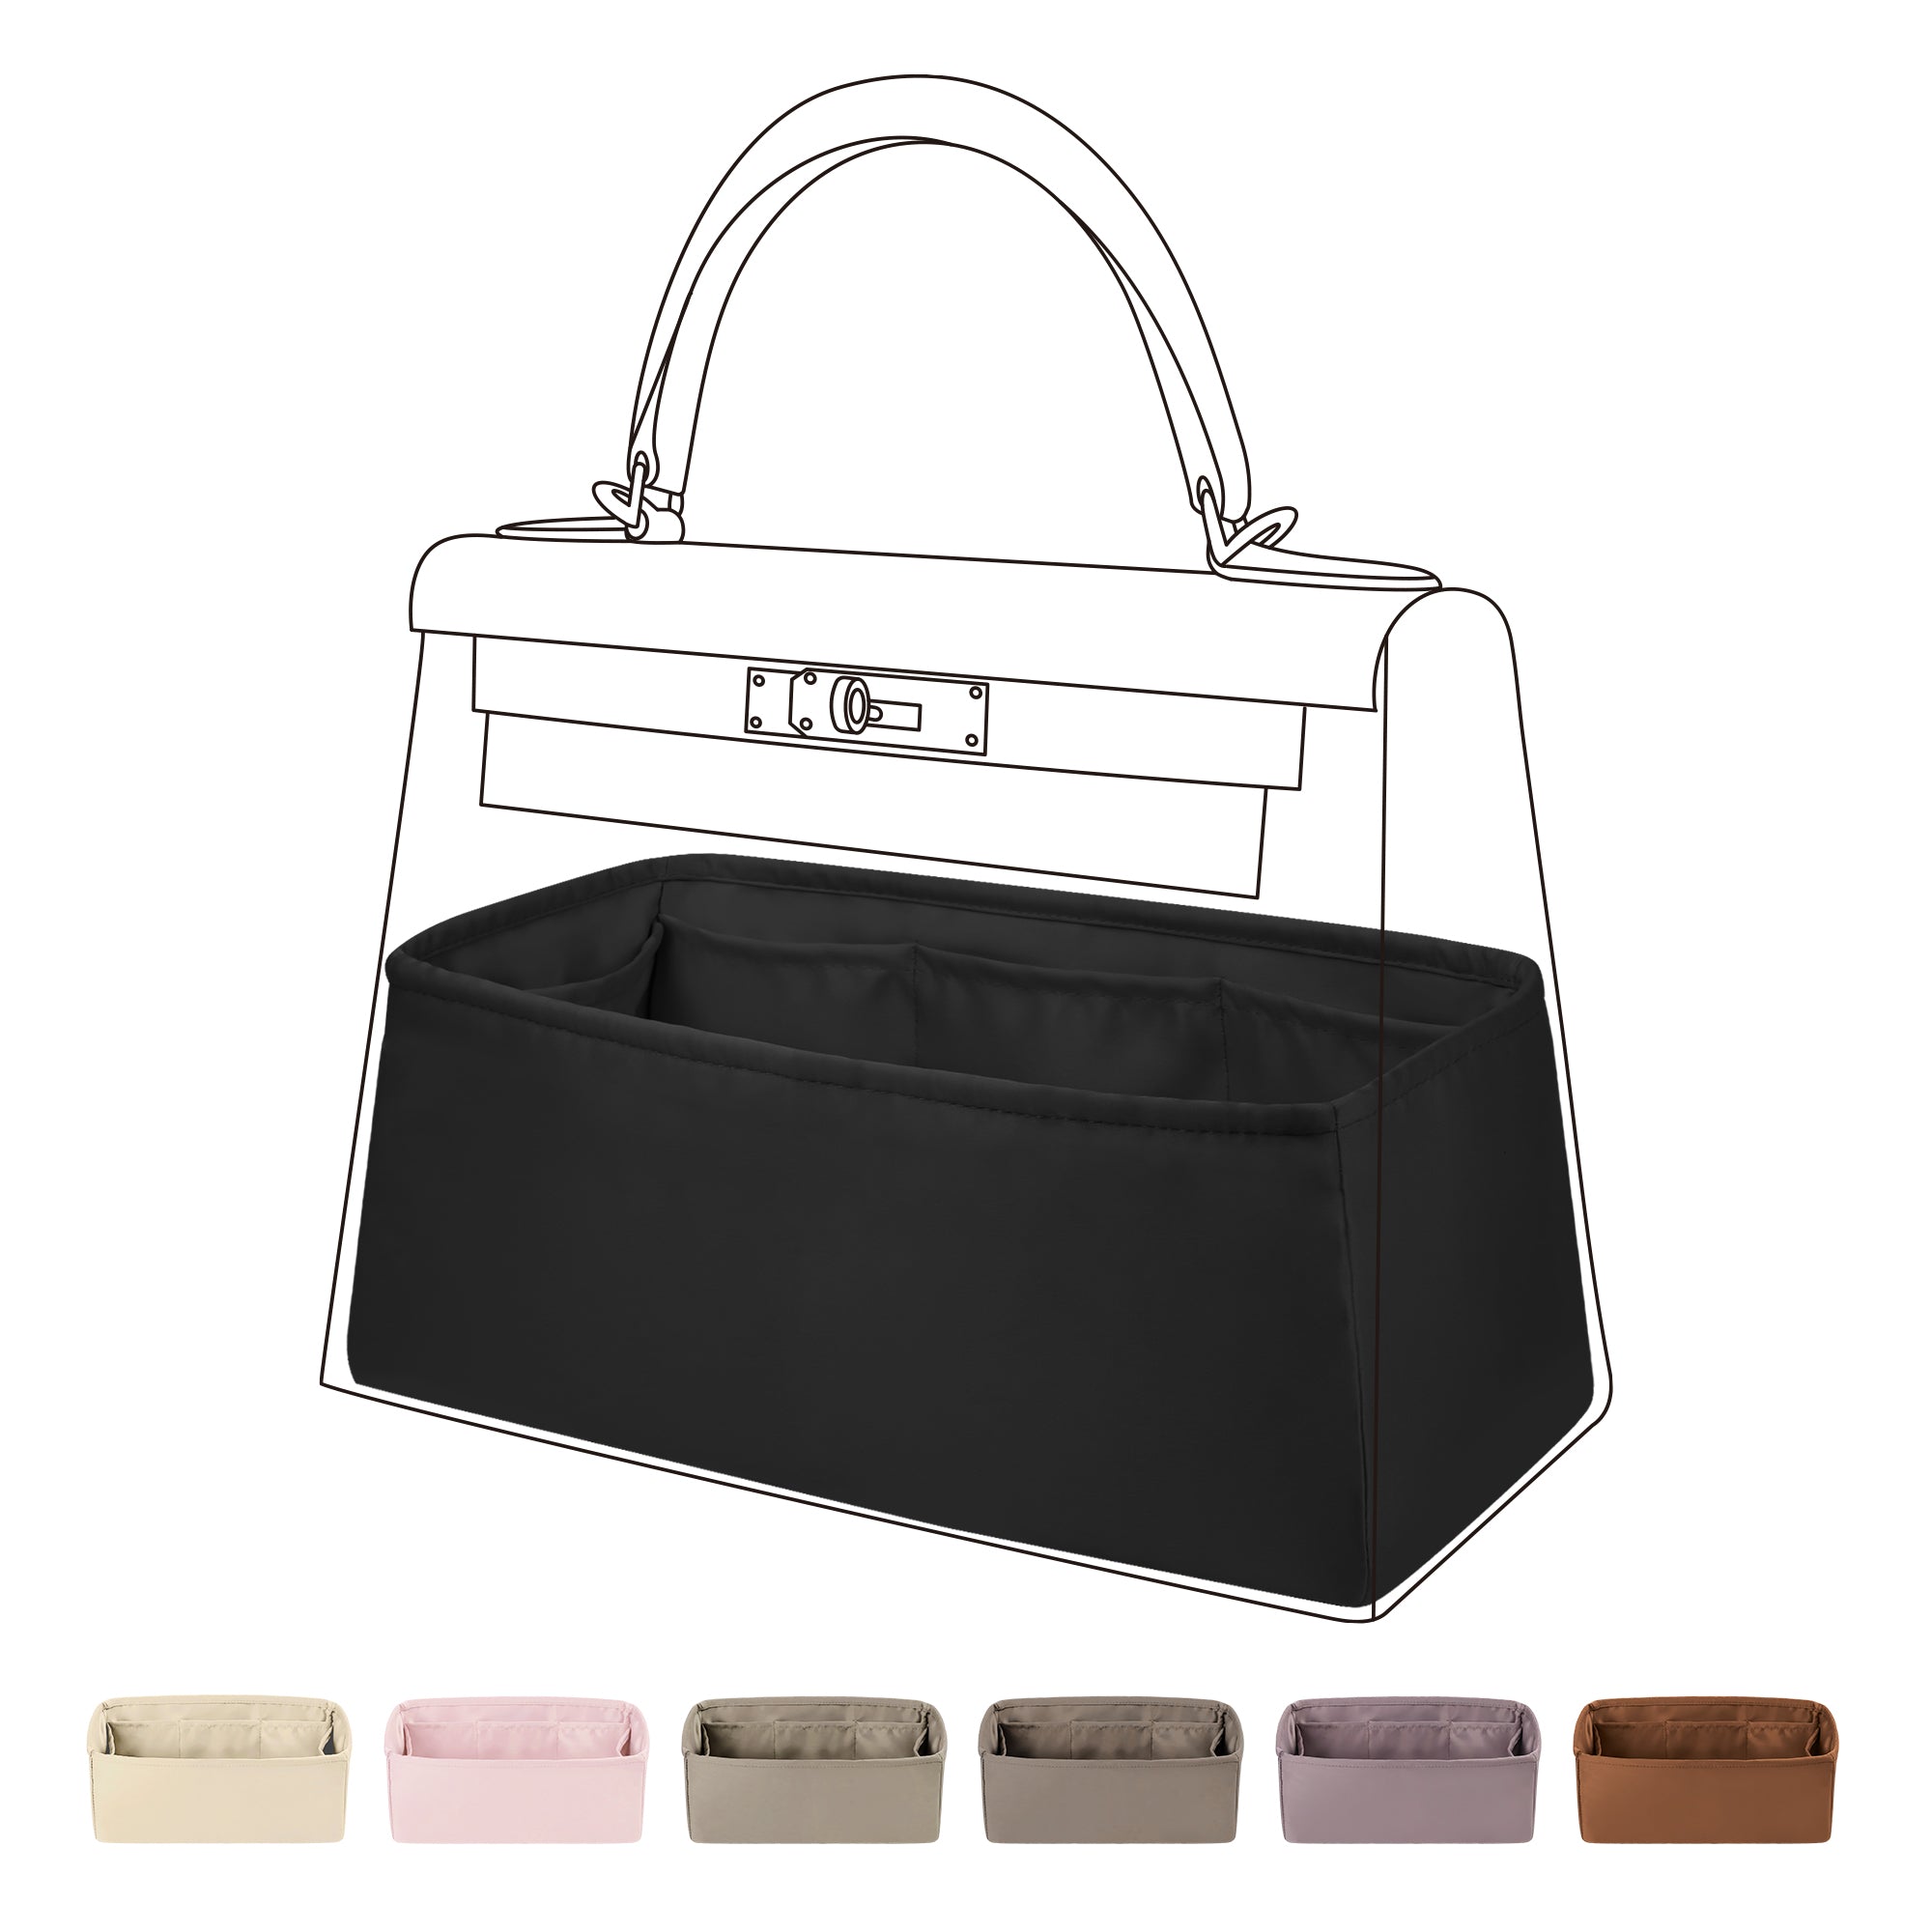 Premium High end version of Purse Organizer specially for Hermes